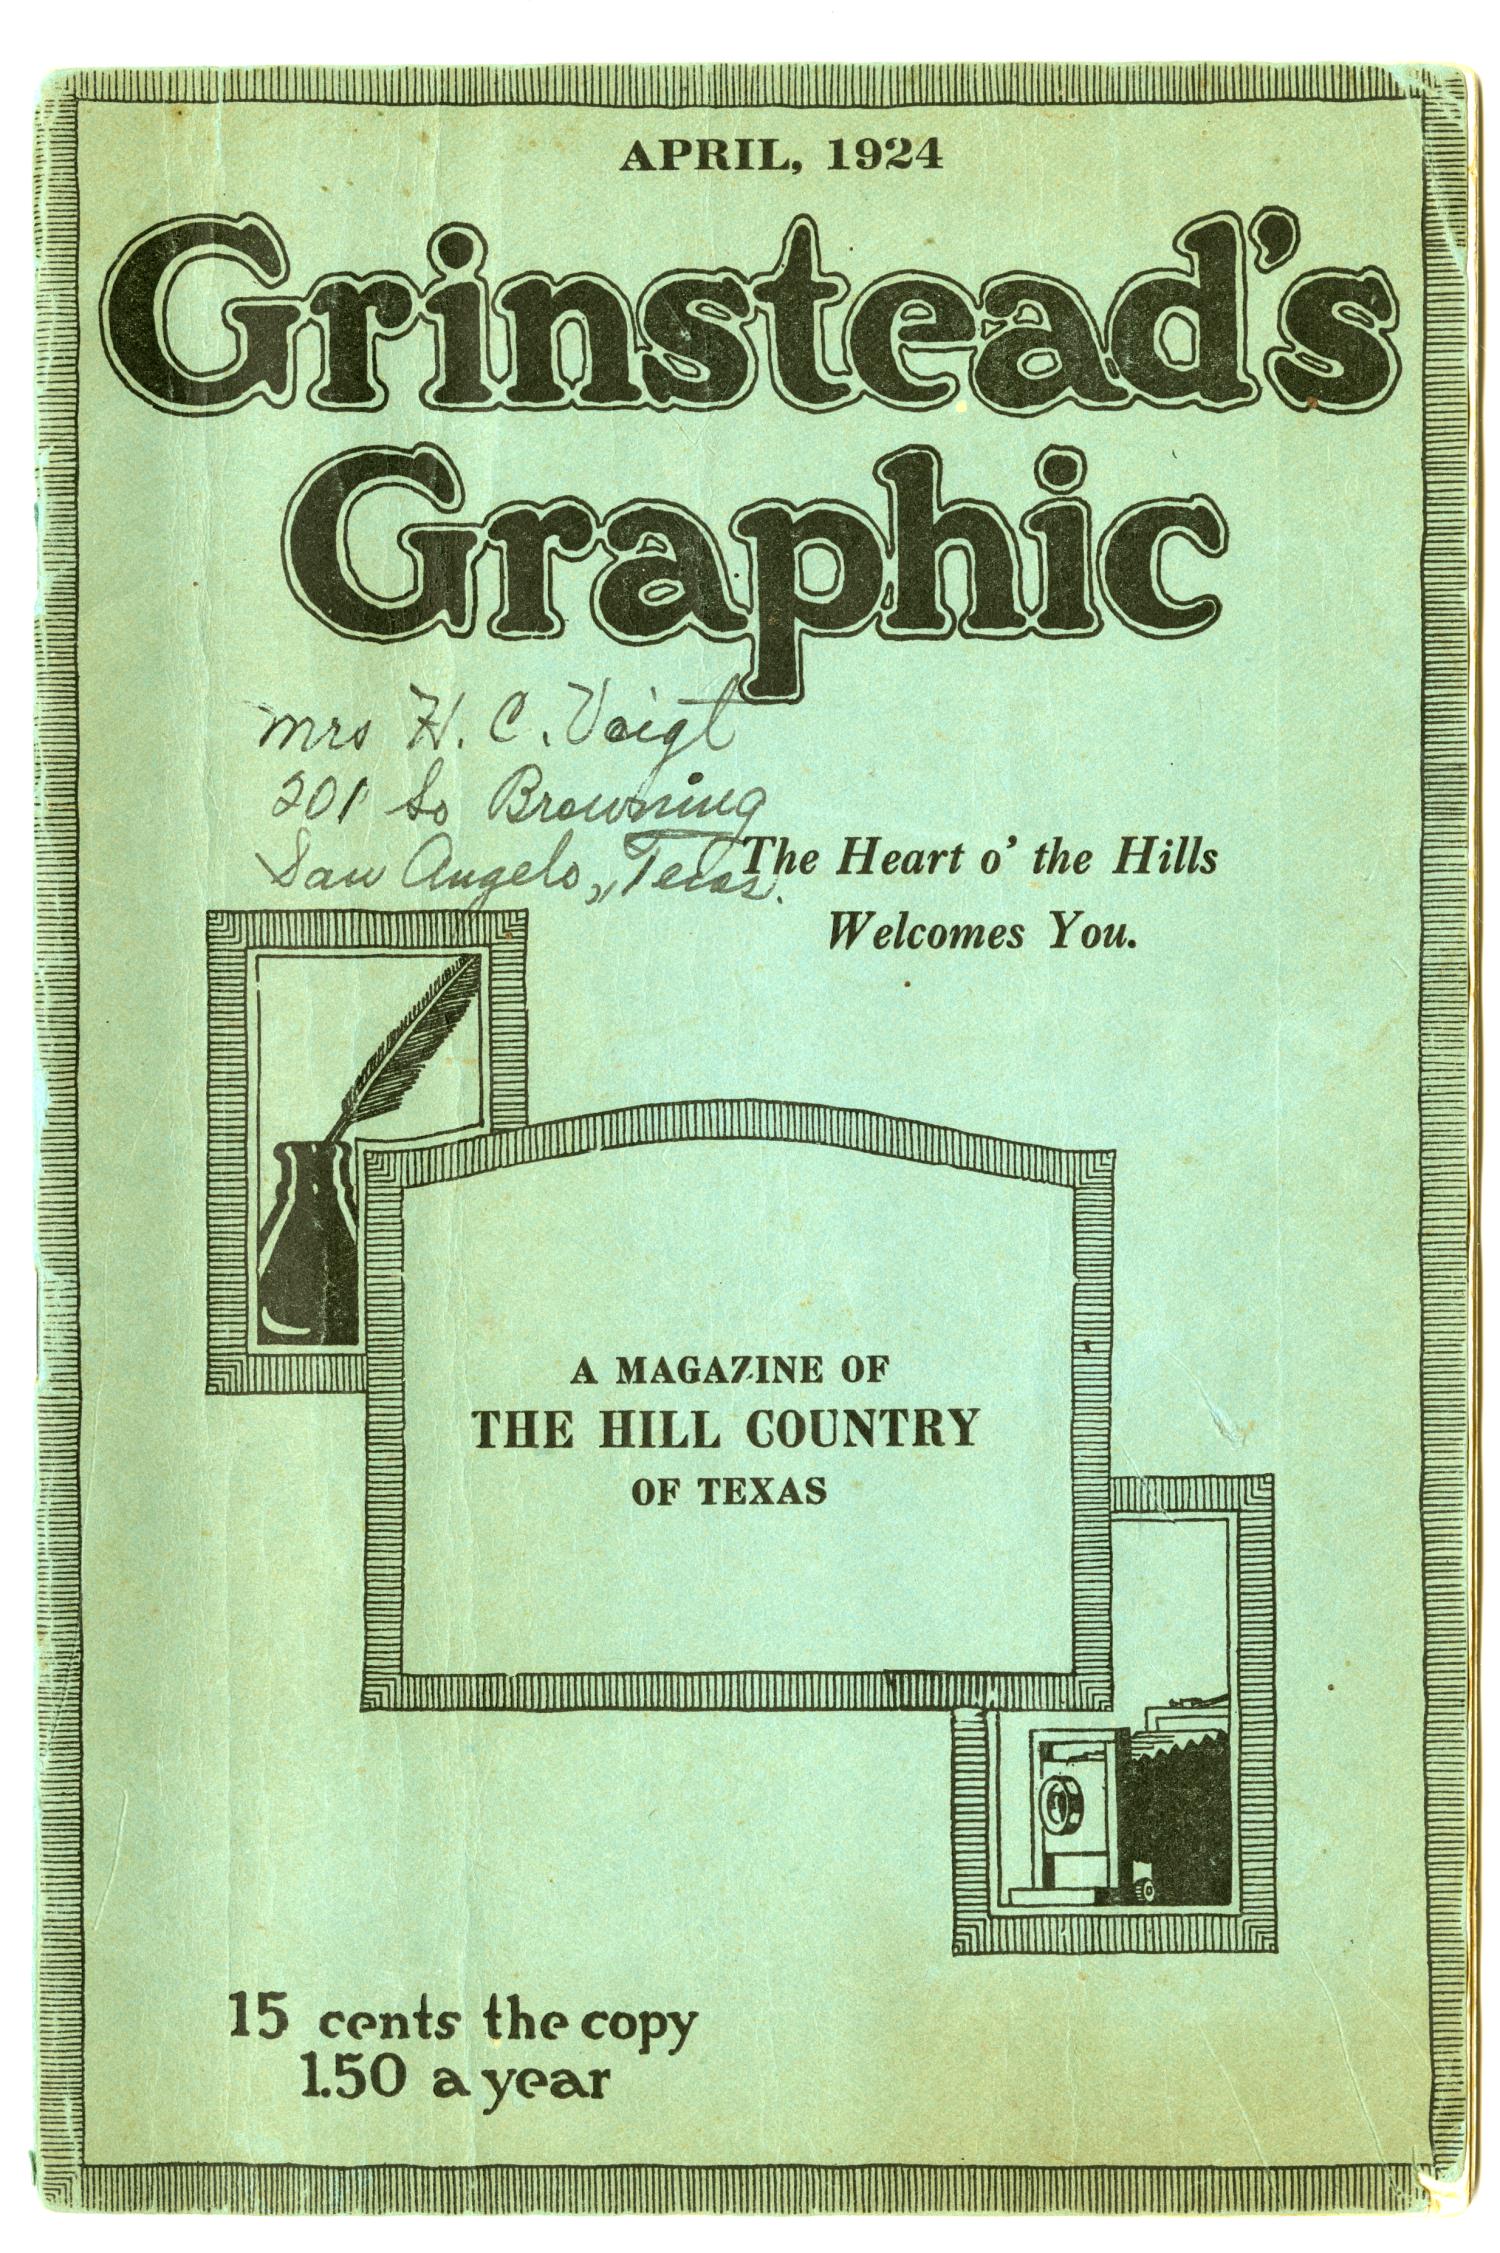 Grinstead's Graphic, Volume 4, Number 4, April 1924
                                                
                                                    Front Cover
                                                